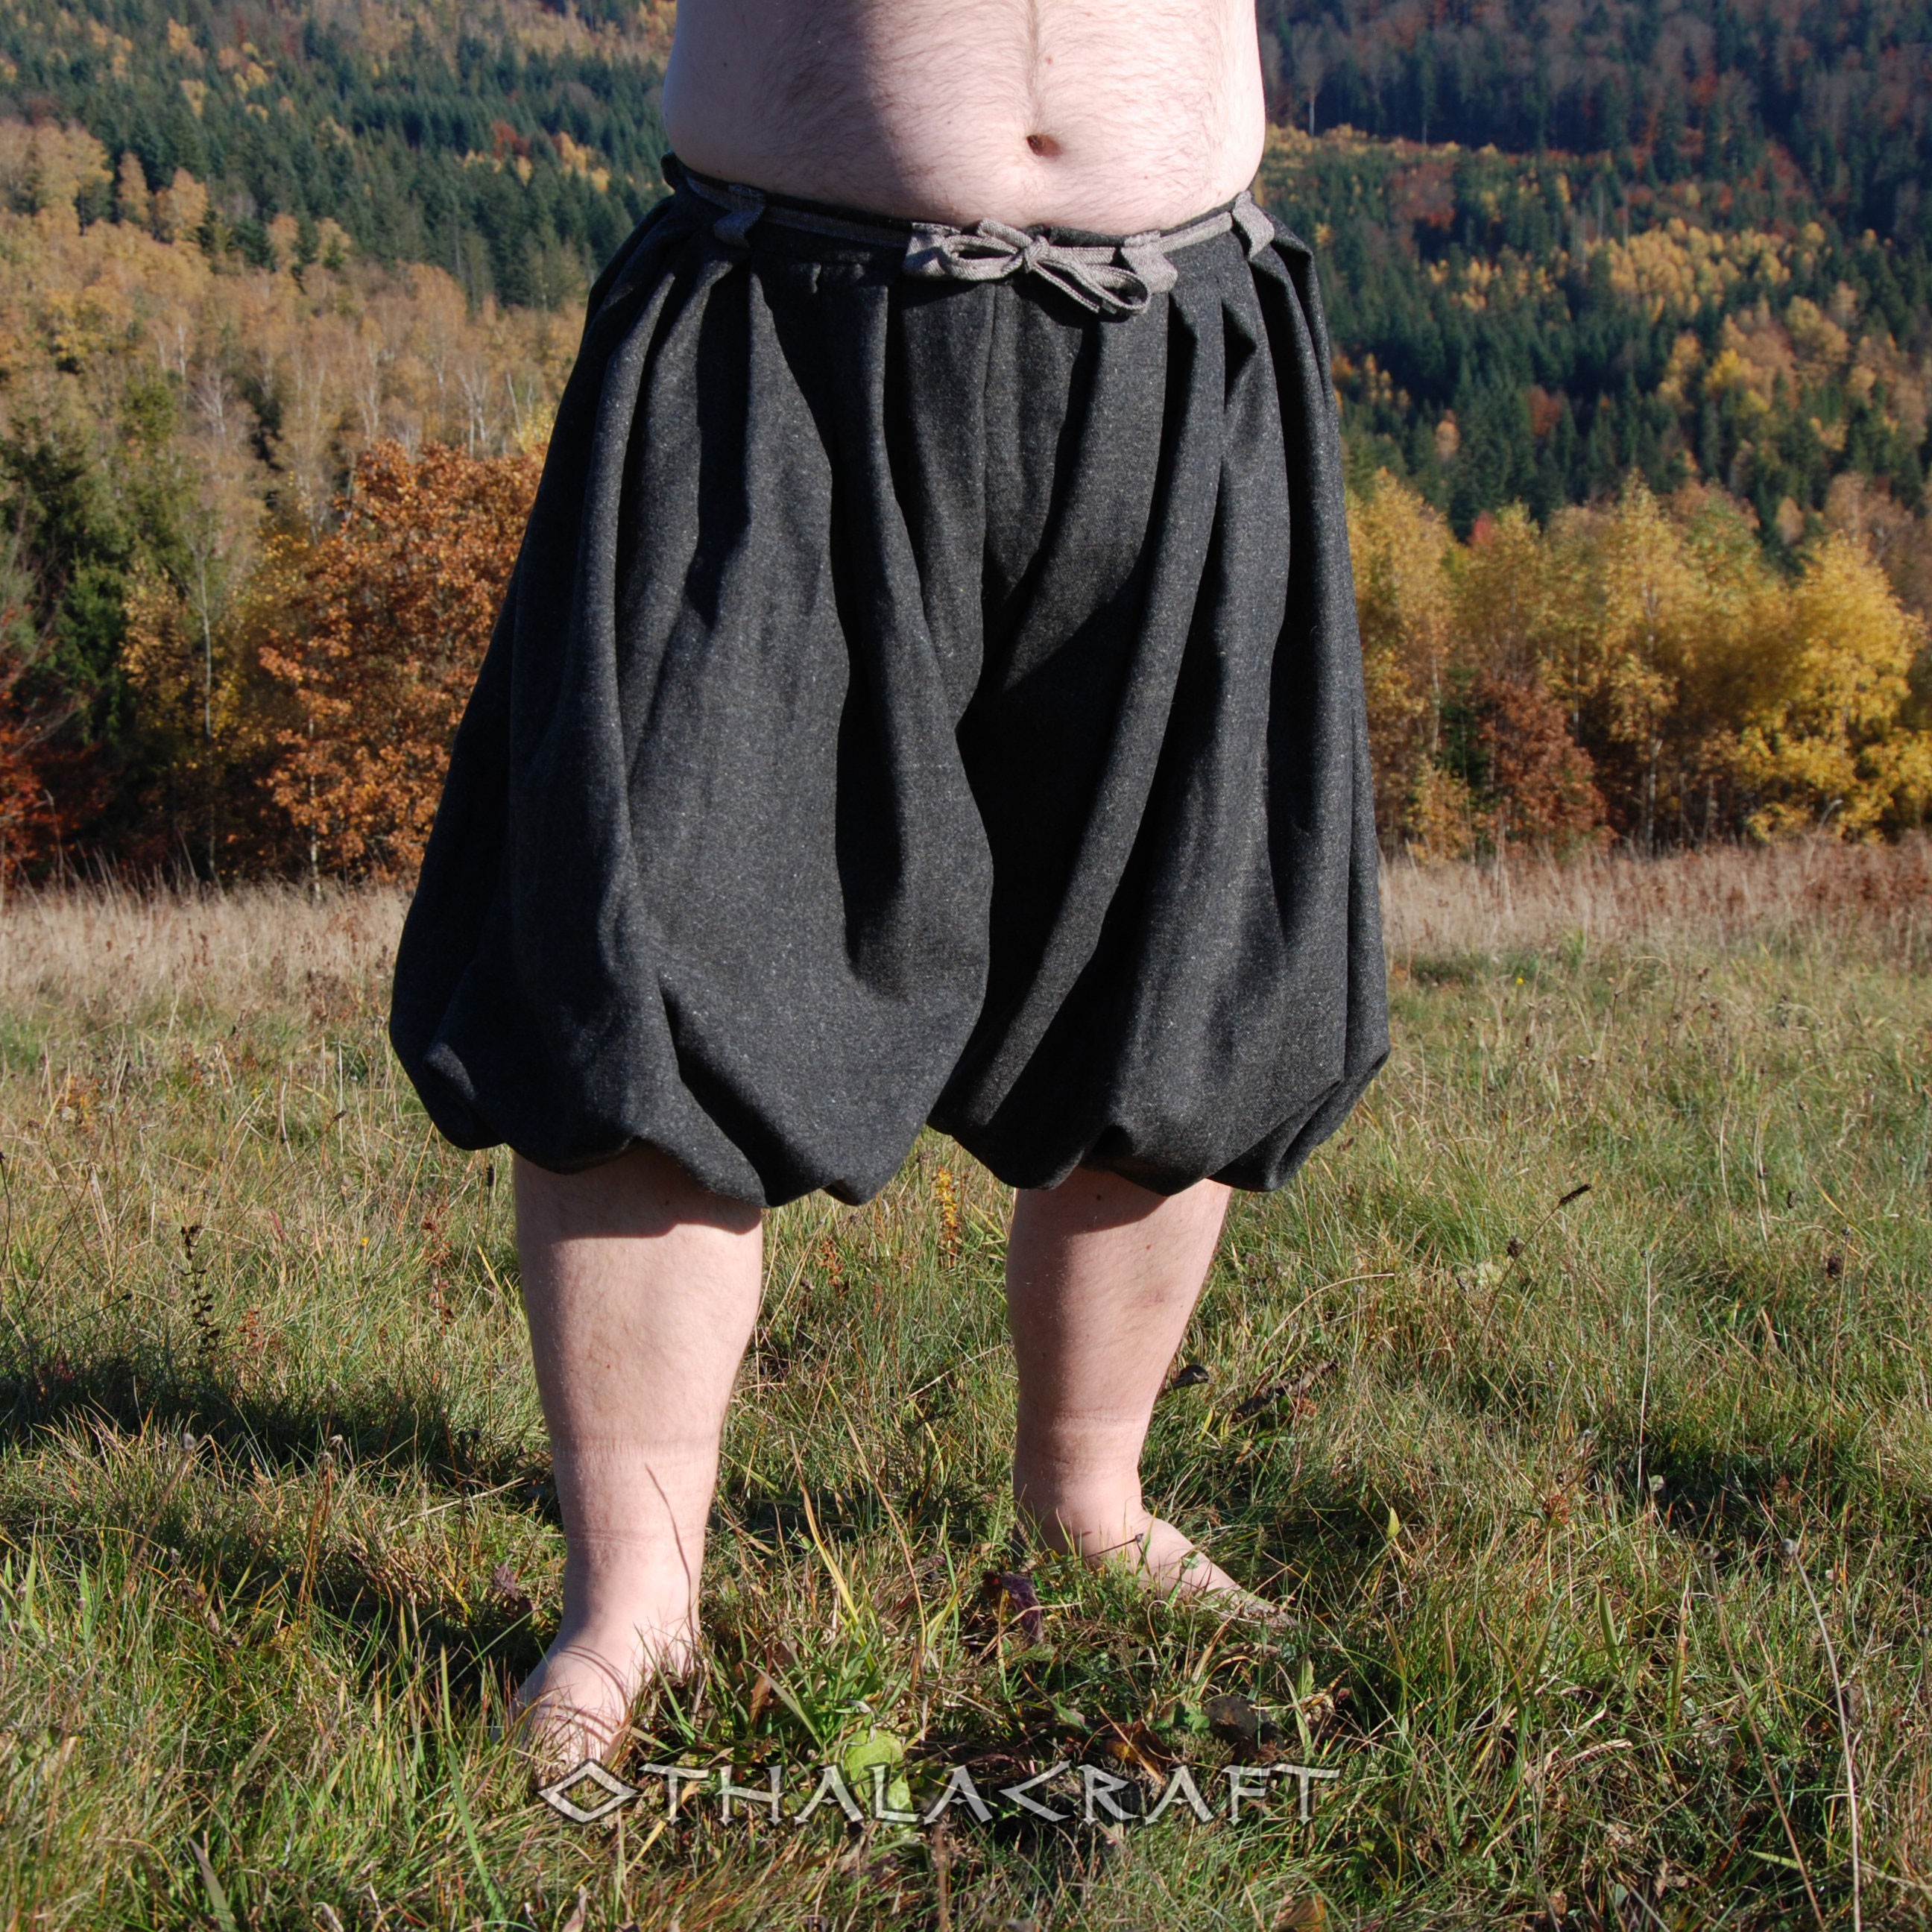 Hedeby trousers - Viking Pants - OthalaCraft